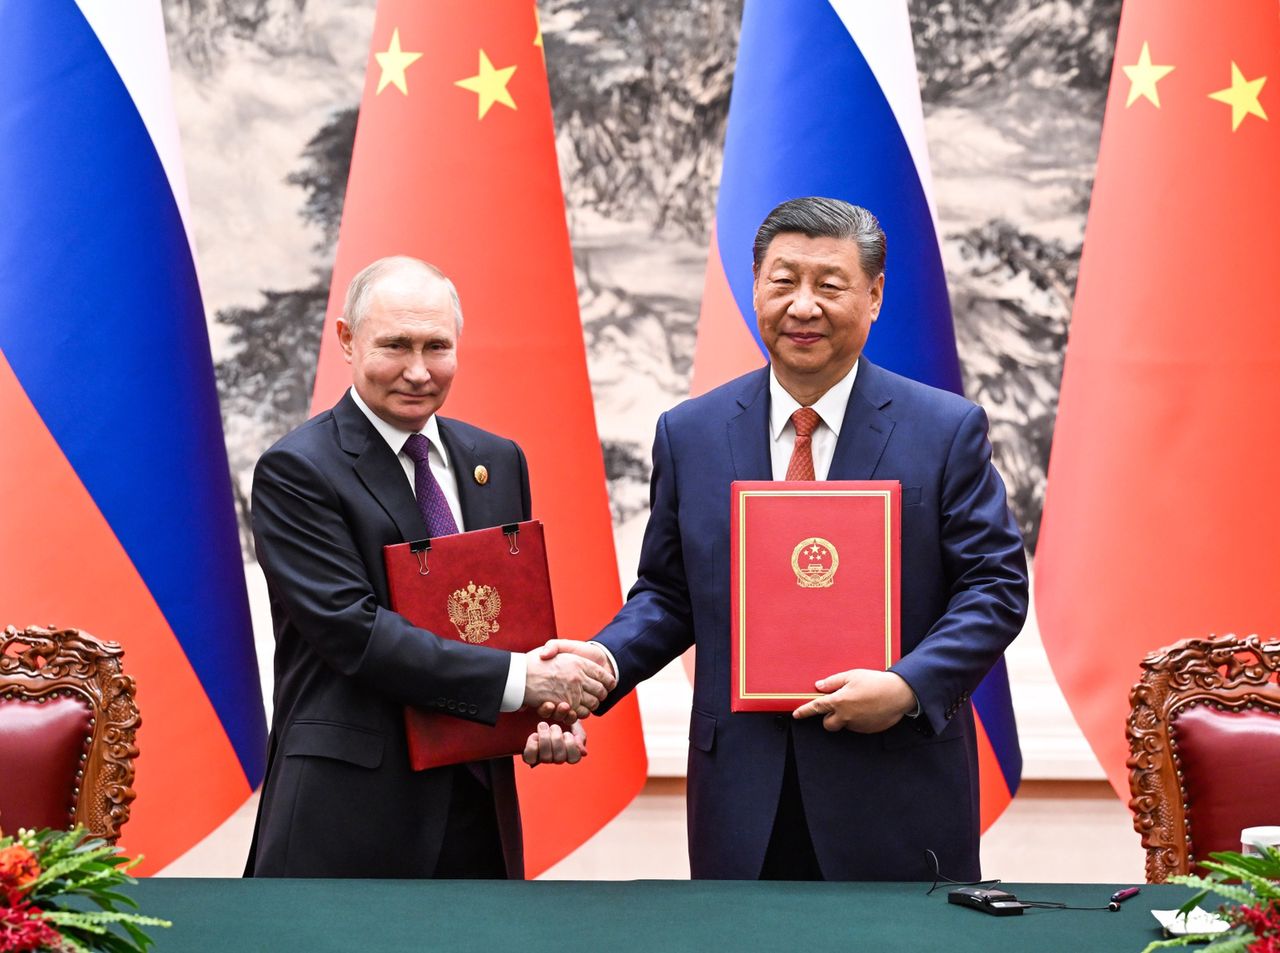 Putin has found an idea for the sanctions. He wants to sell oil and gas to China.